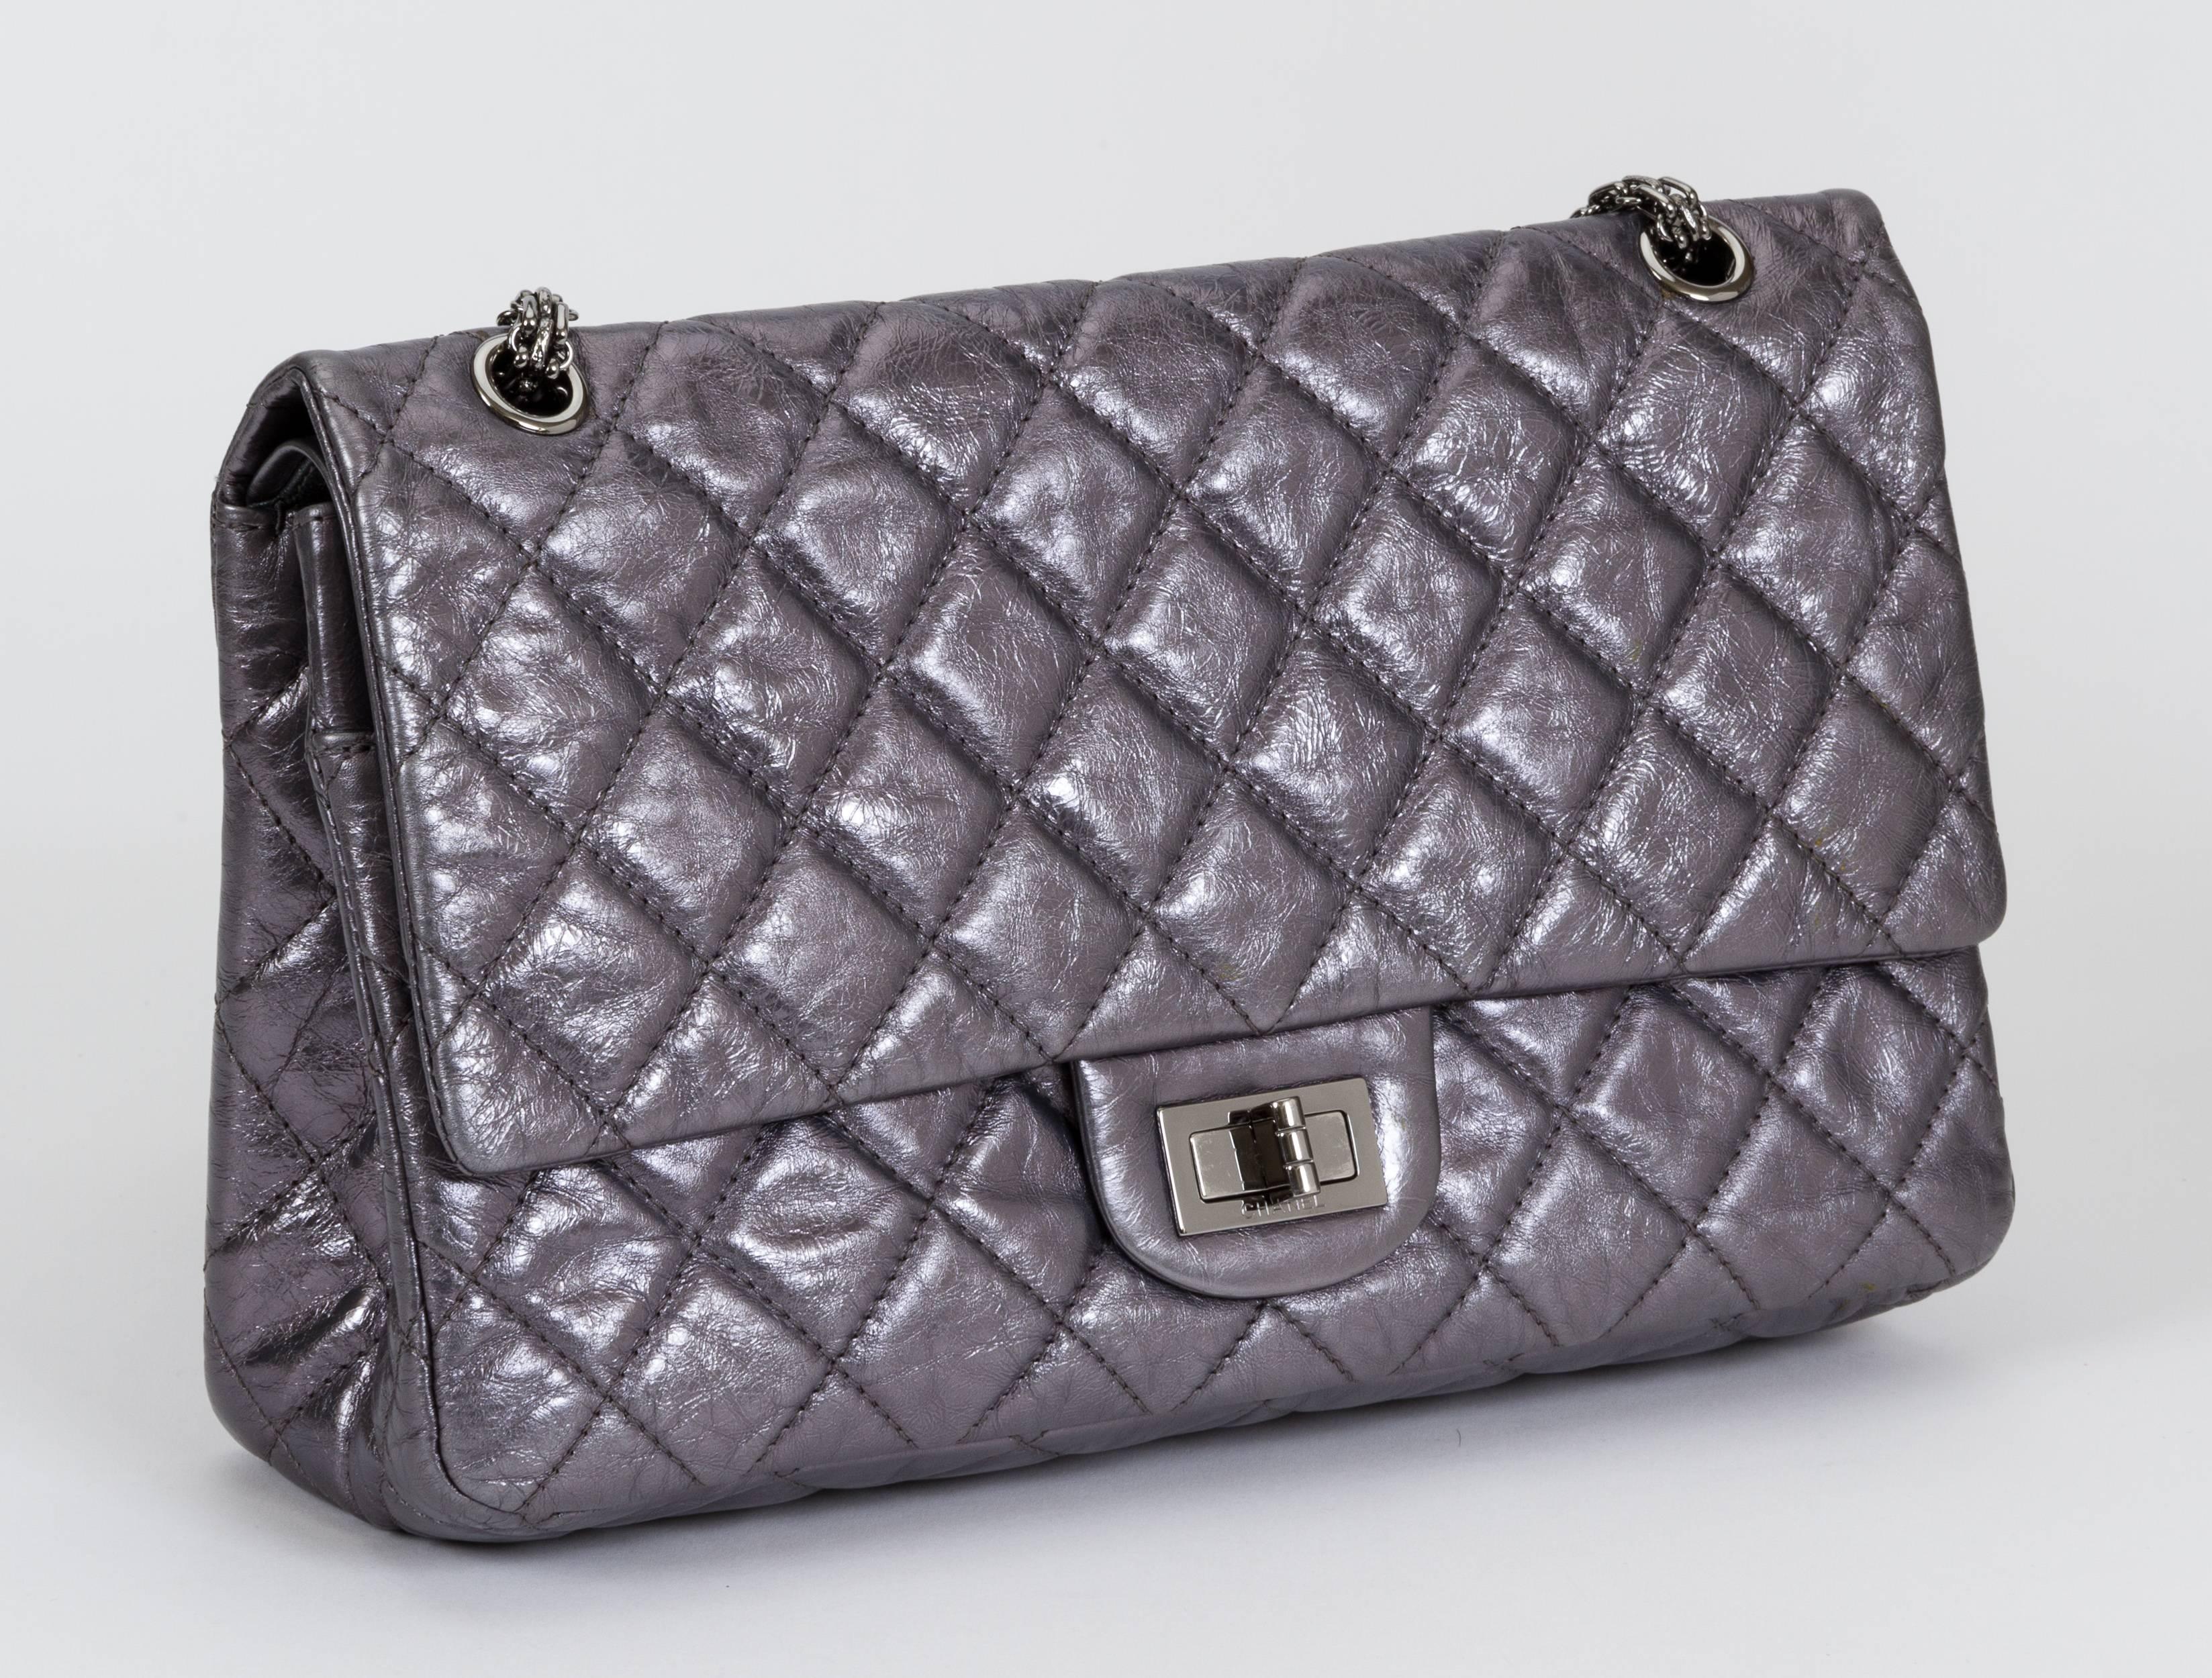 Chanel limited edition metallic reissue jumbo double flap in pewter. Shoulder drop 9.5